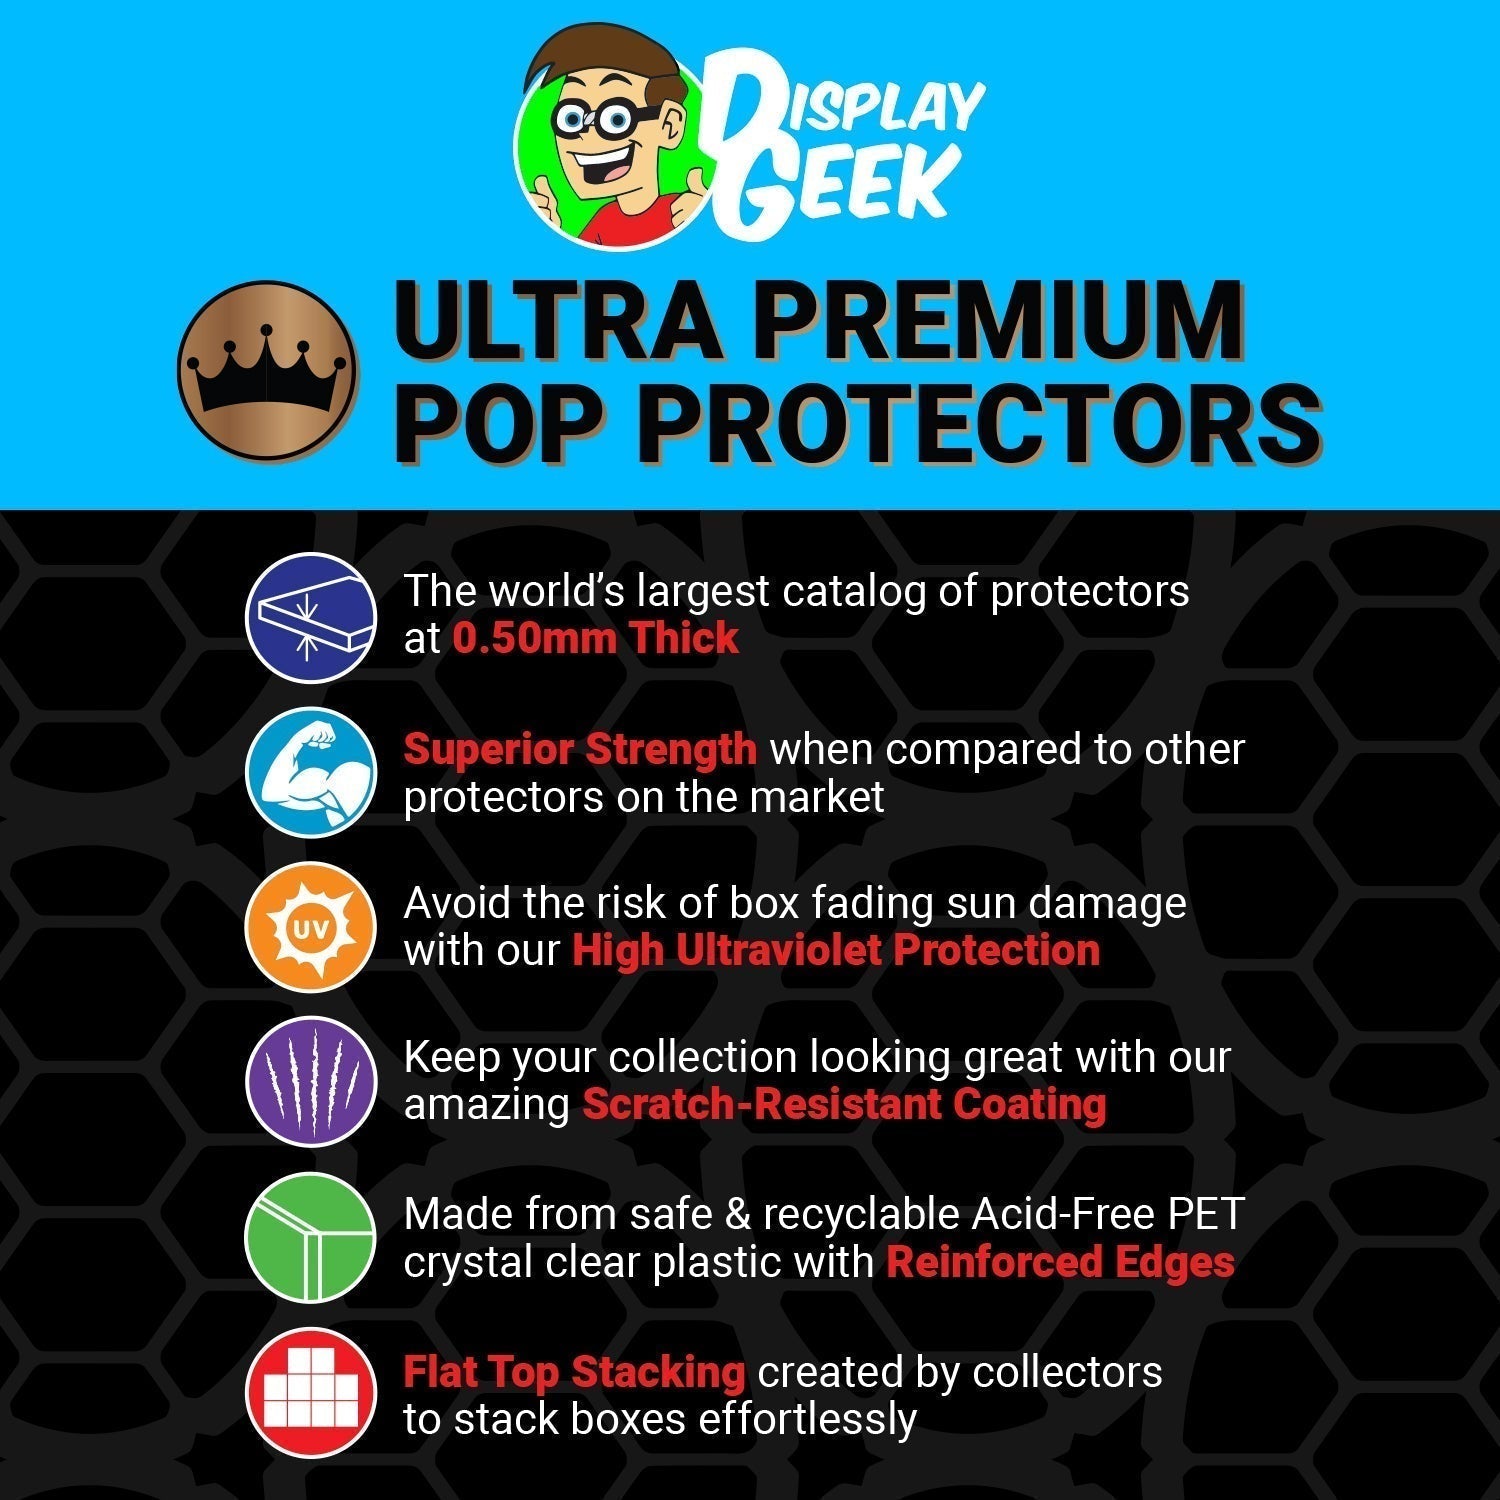 Pop Protector for Cthulhu FunkO's Cereal Box - PPG Pop Protector Guide Search Created by Display Geek